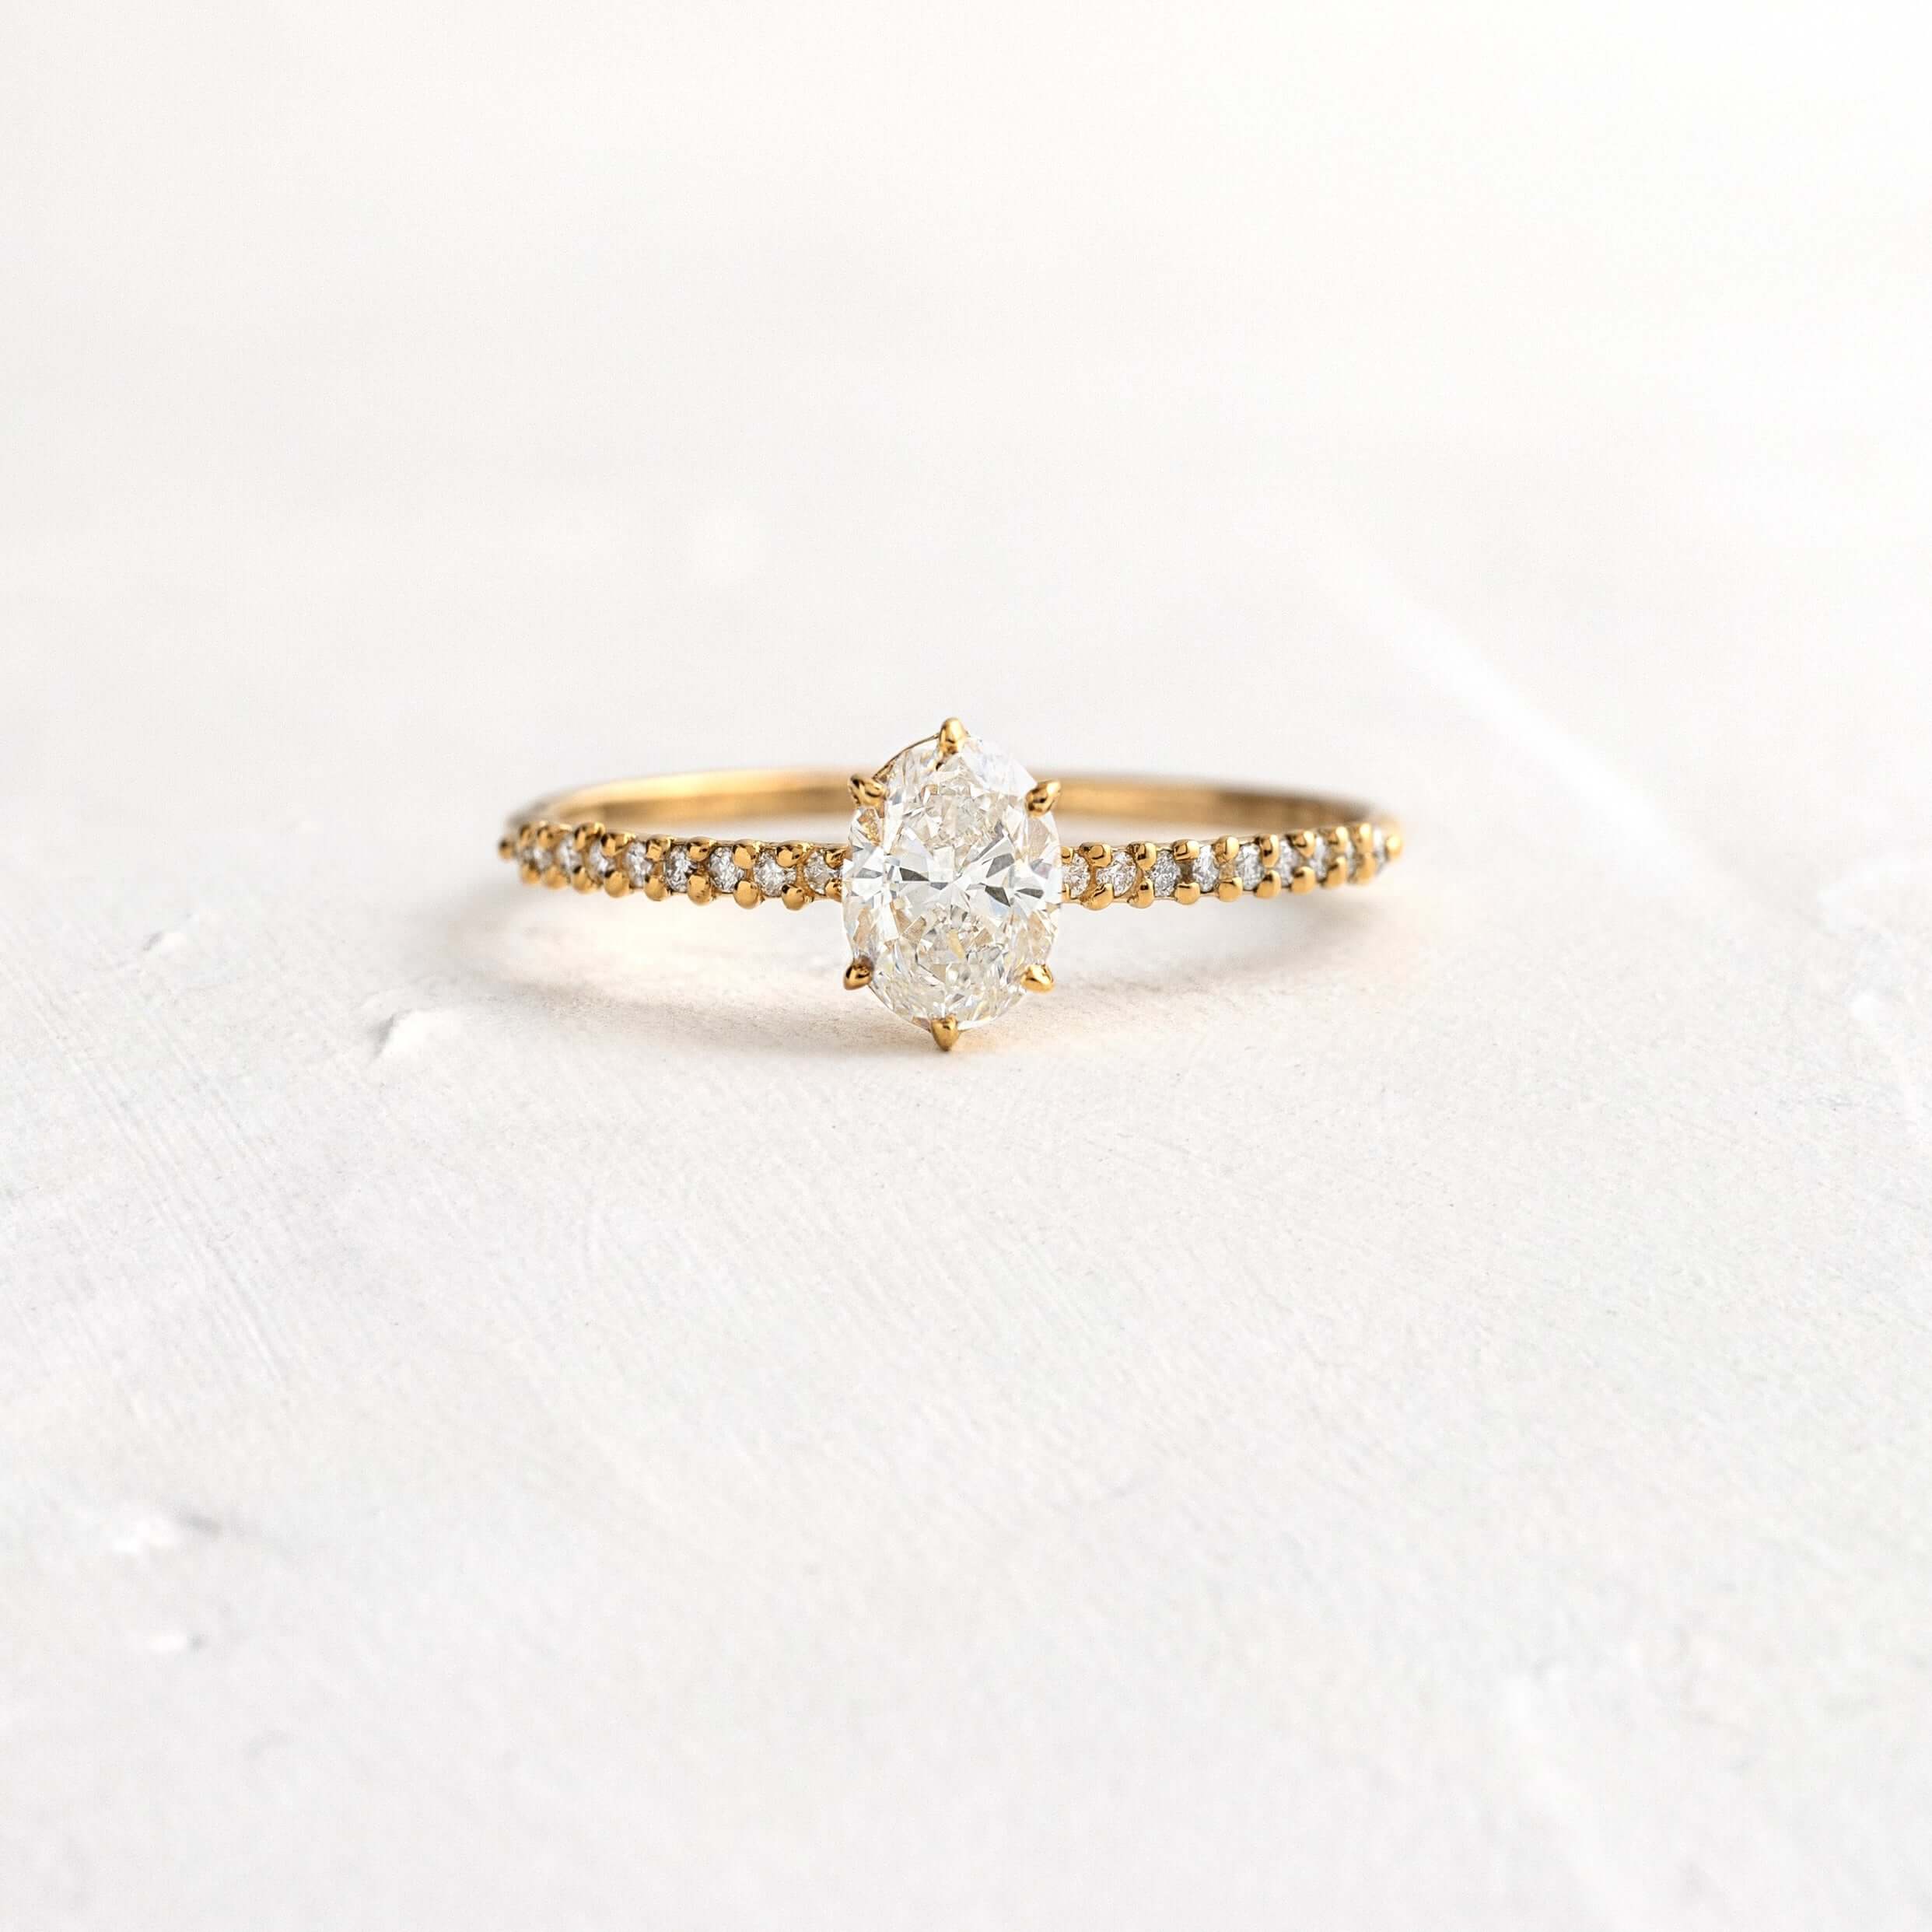 Whisper Ring with Pave Band, Oval Cut Diamond | Melanie Casey